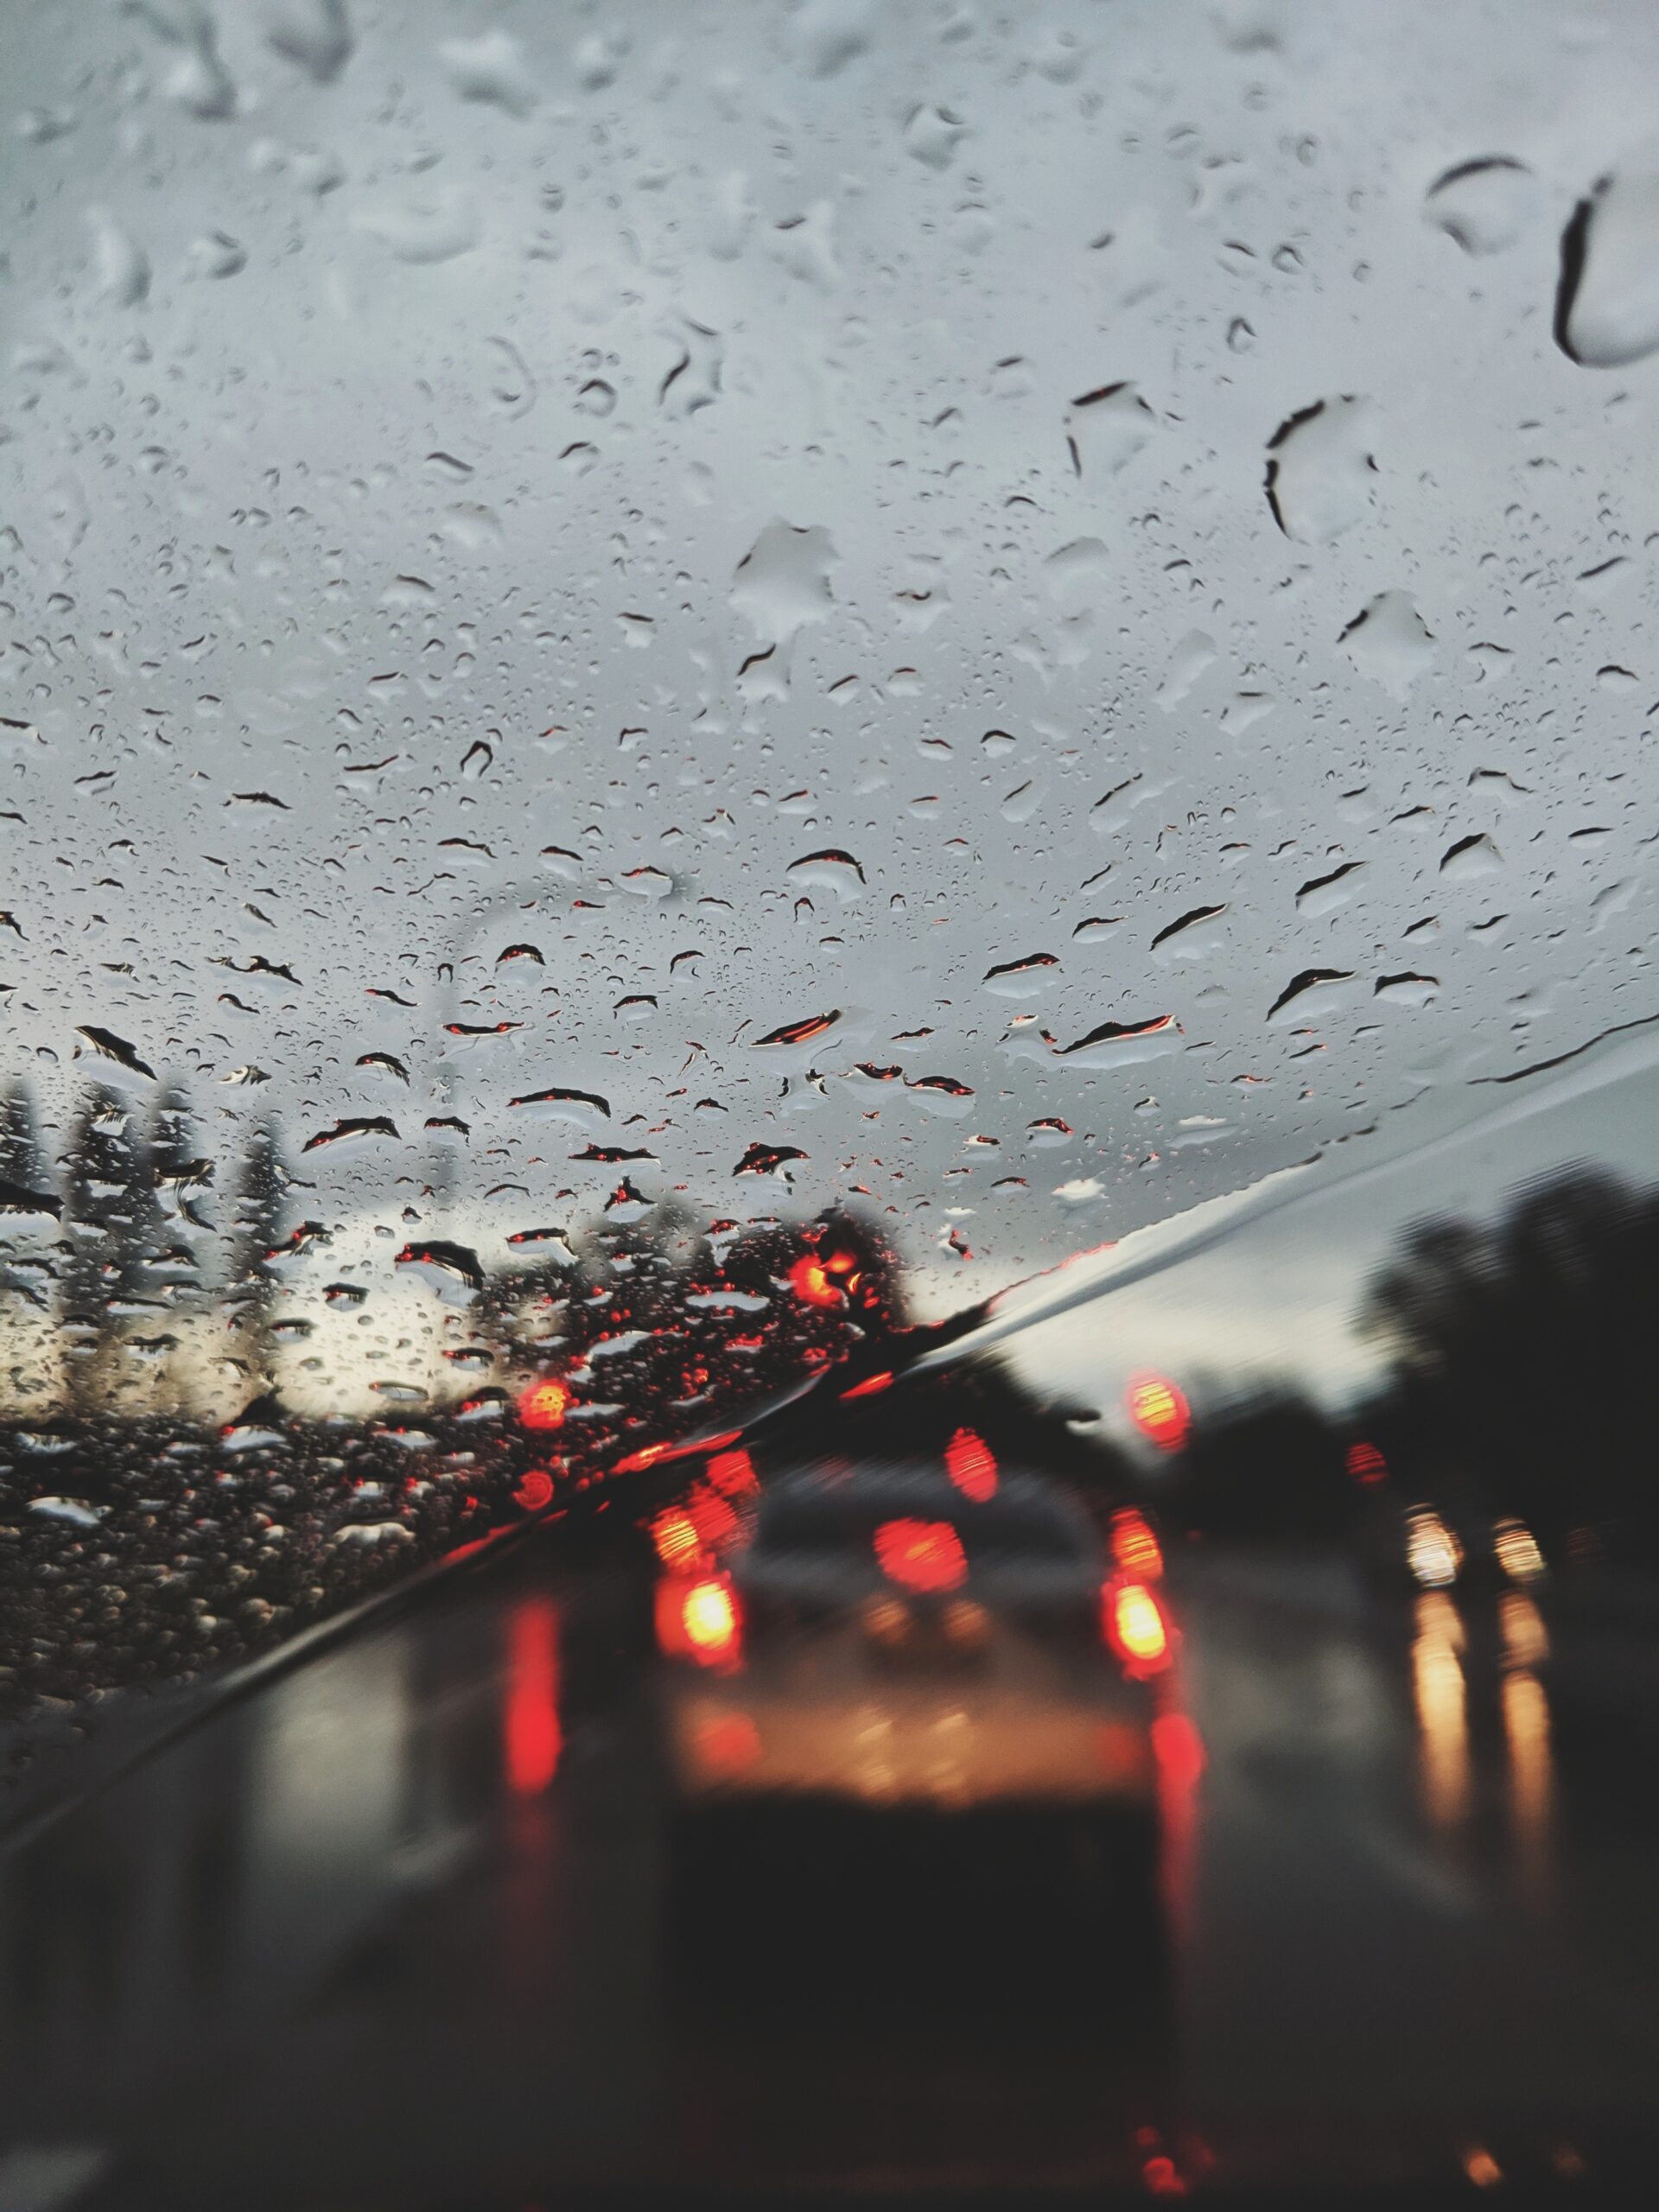 Driving in the Rain Instagram Captions